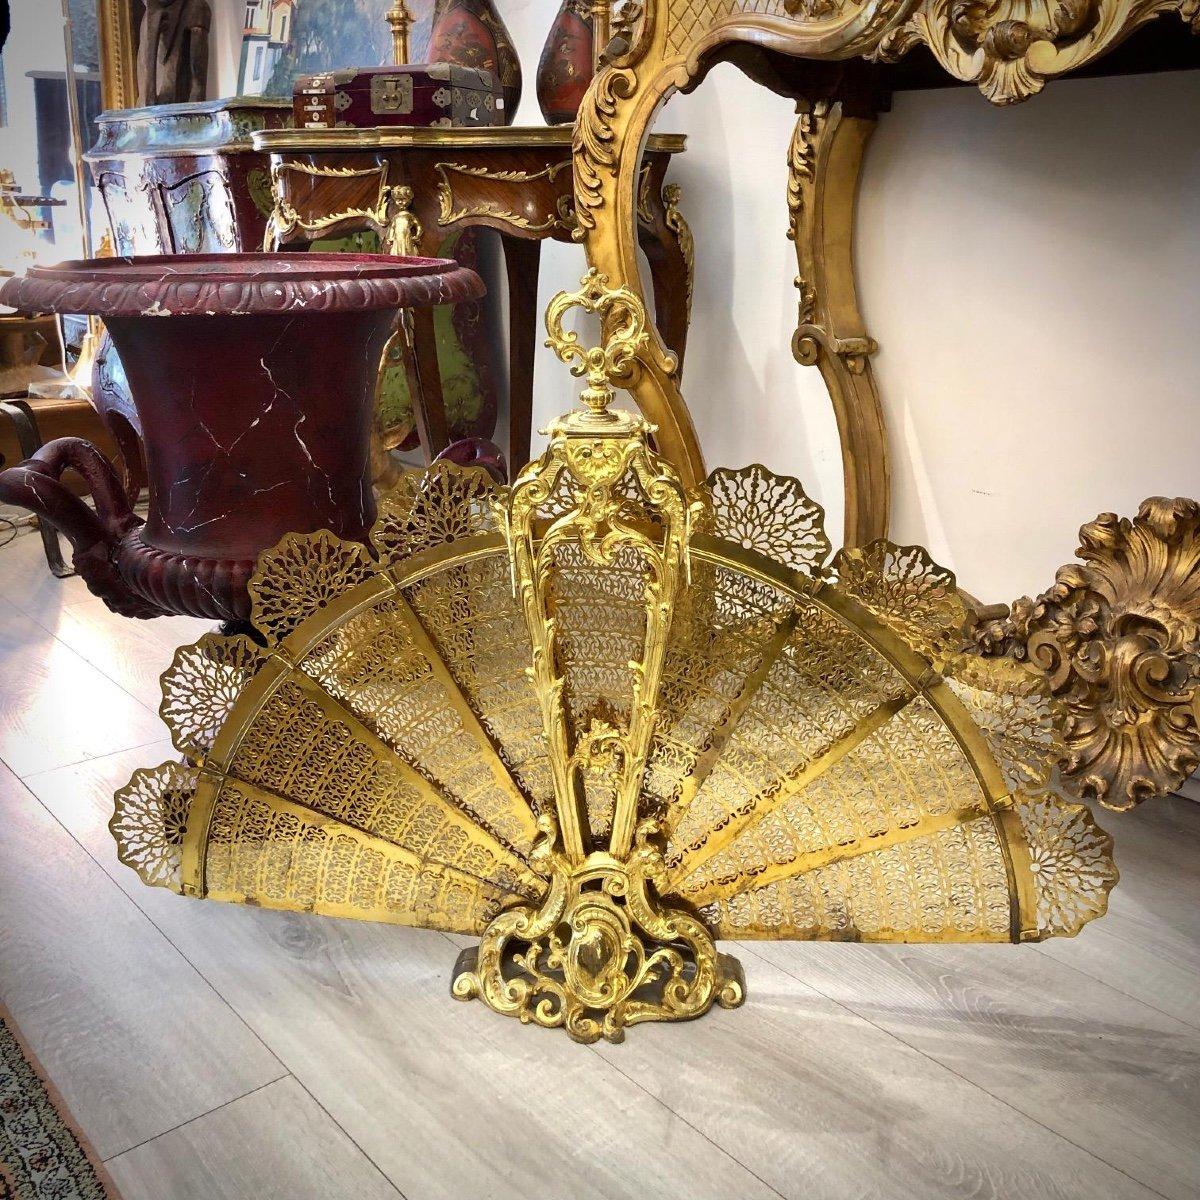 This exquisite fireplace screen is crafted in the shape of a peacock and features eight retractable elements. The bronze exhibits superb gilding, with minor signs of wear on the most exposed areas of this piece. It is in flawless working condition